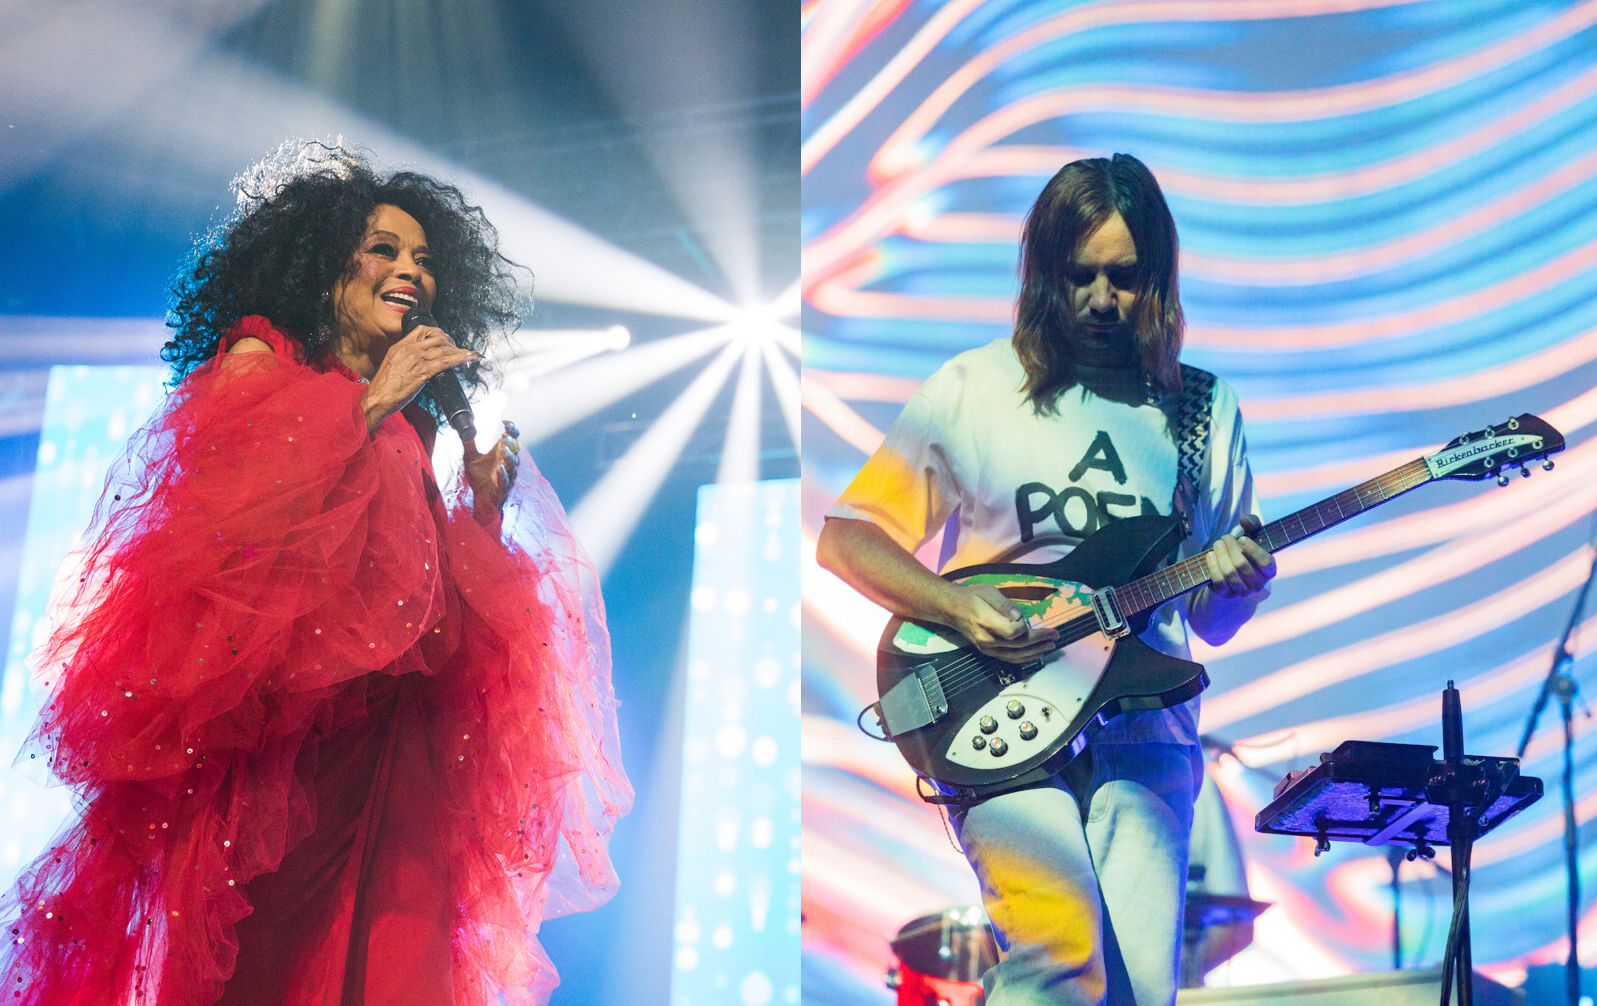 Diana Ross Teams Up With Tame Impala For Turn Up The Sunshine Wxpn Vinyl At Heart